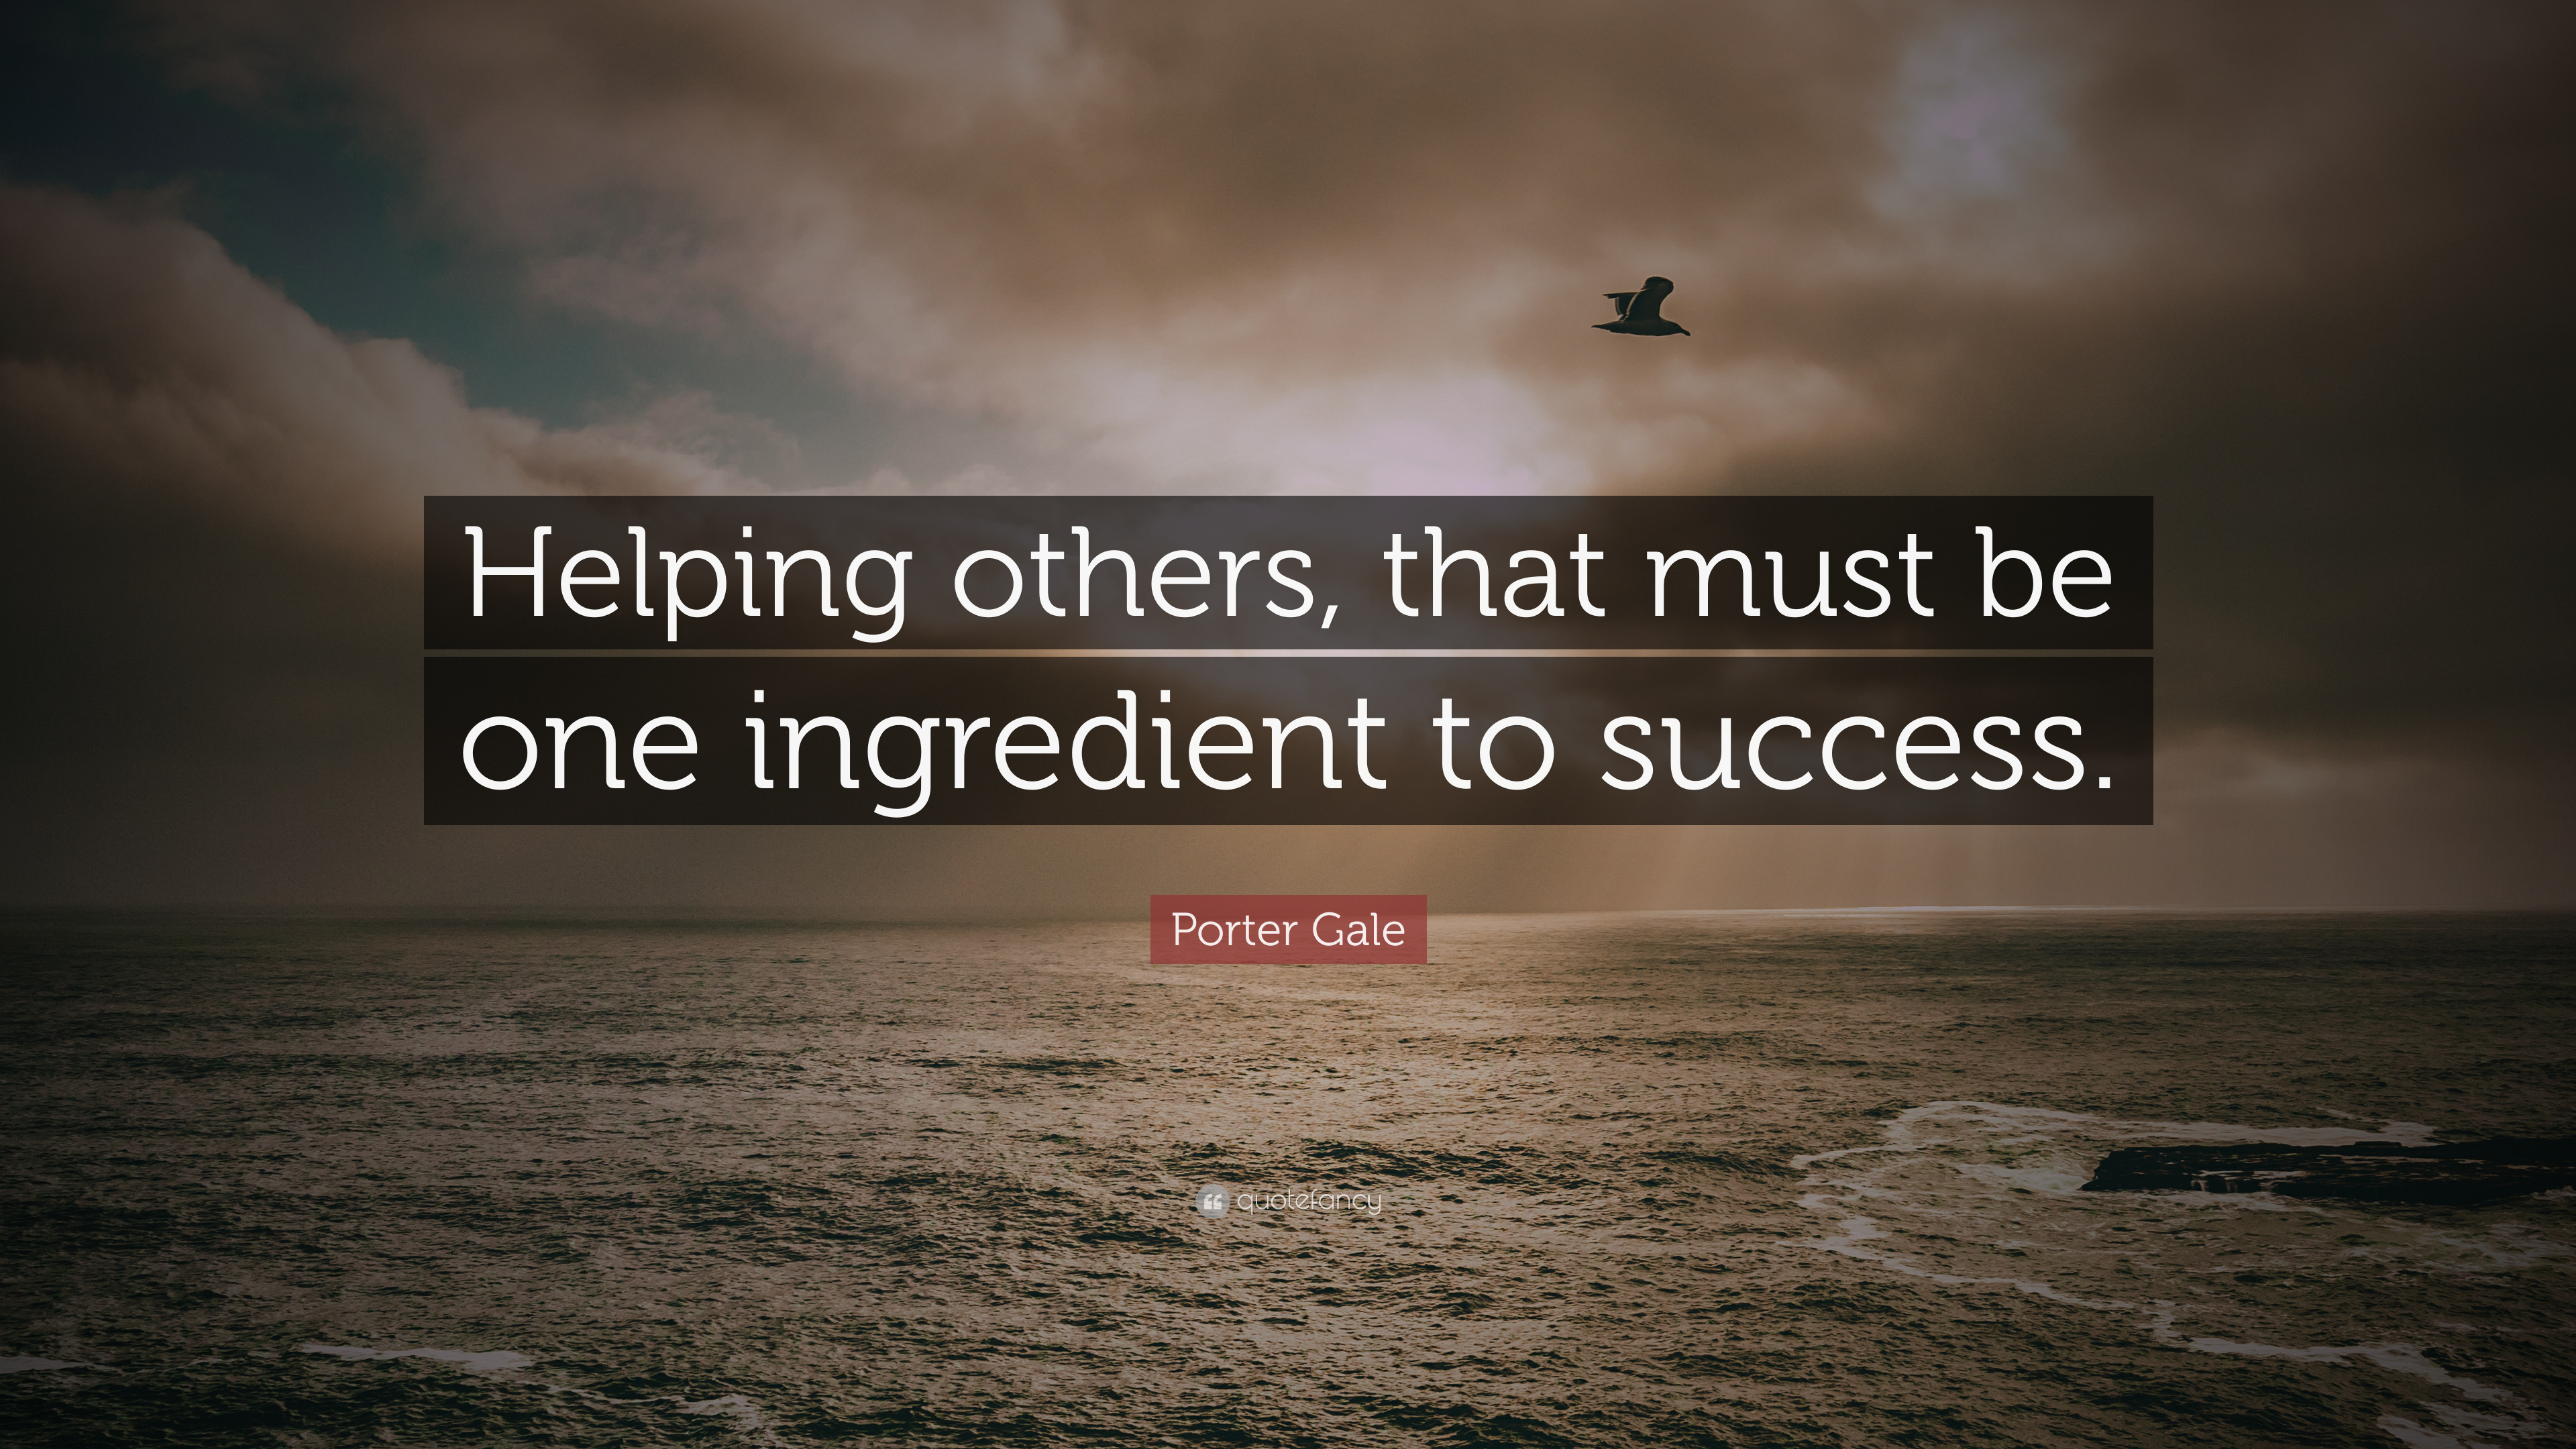 Porter Gale Quote: “Helping others, that must be one ingredient to success.”